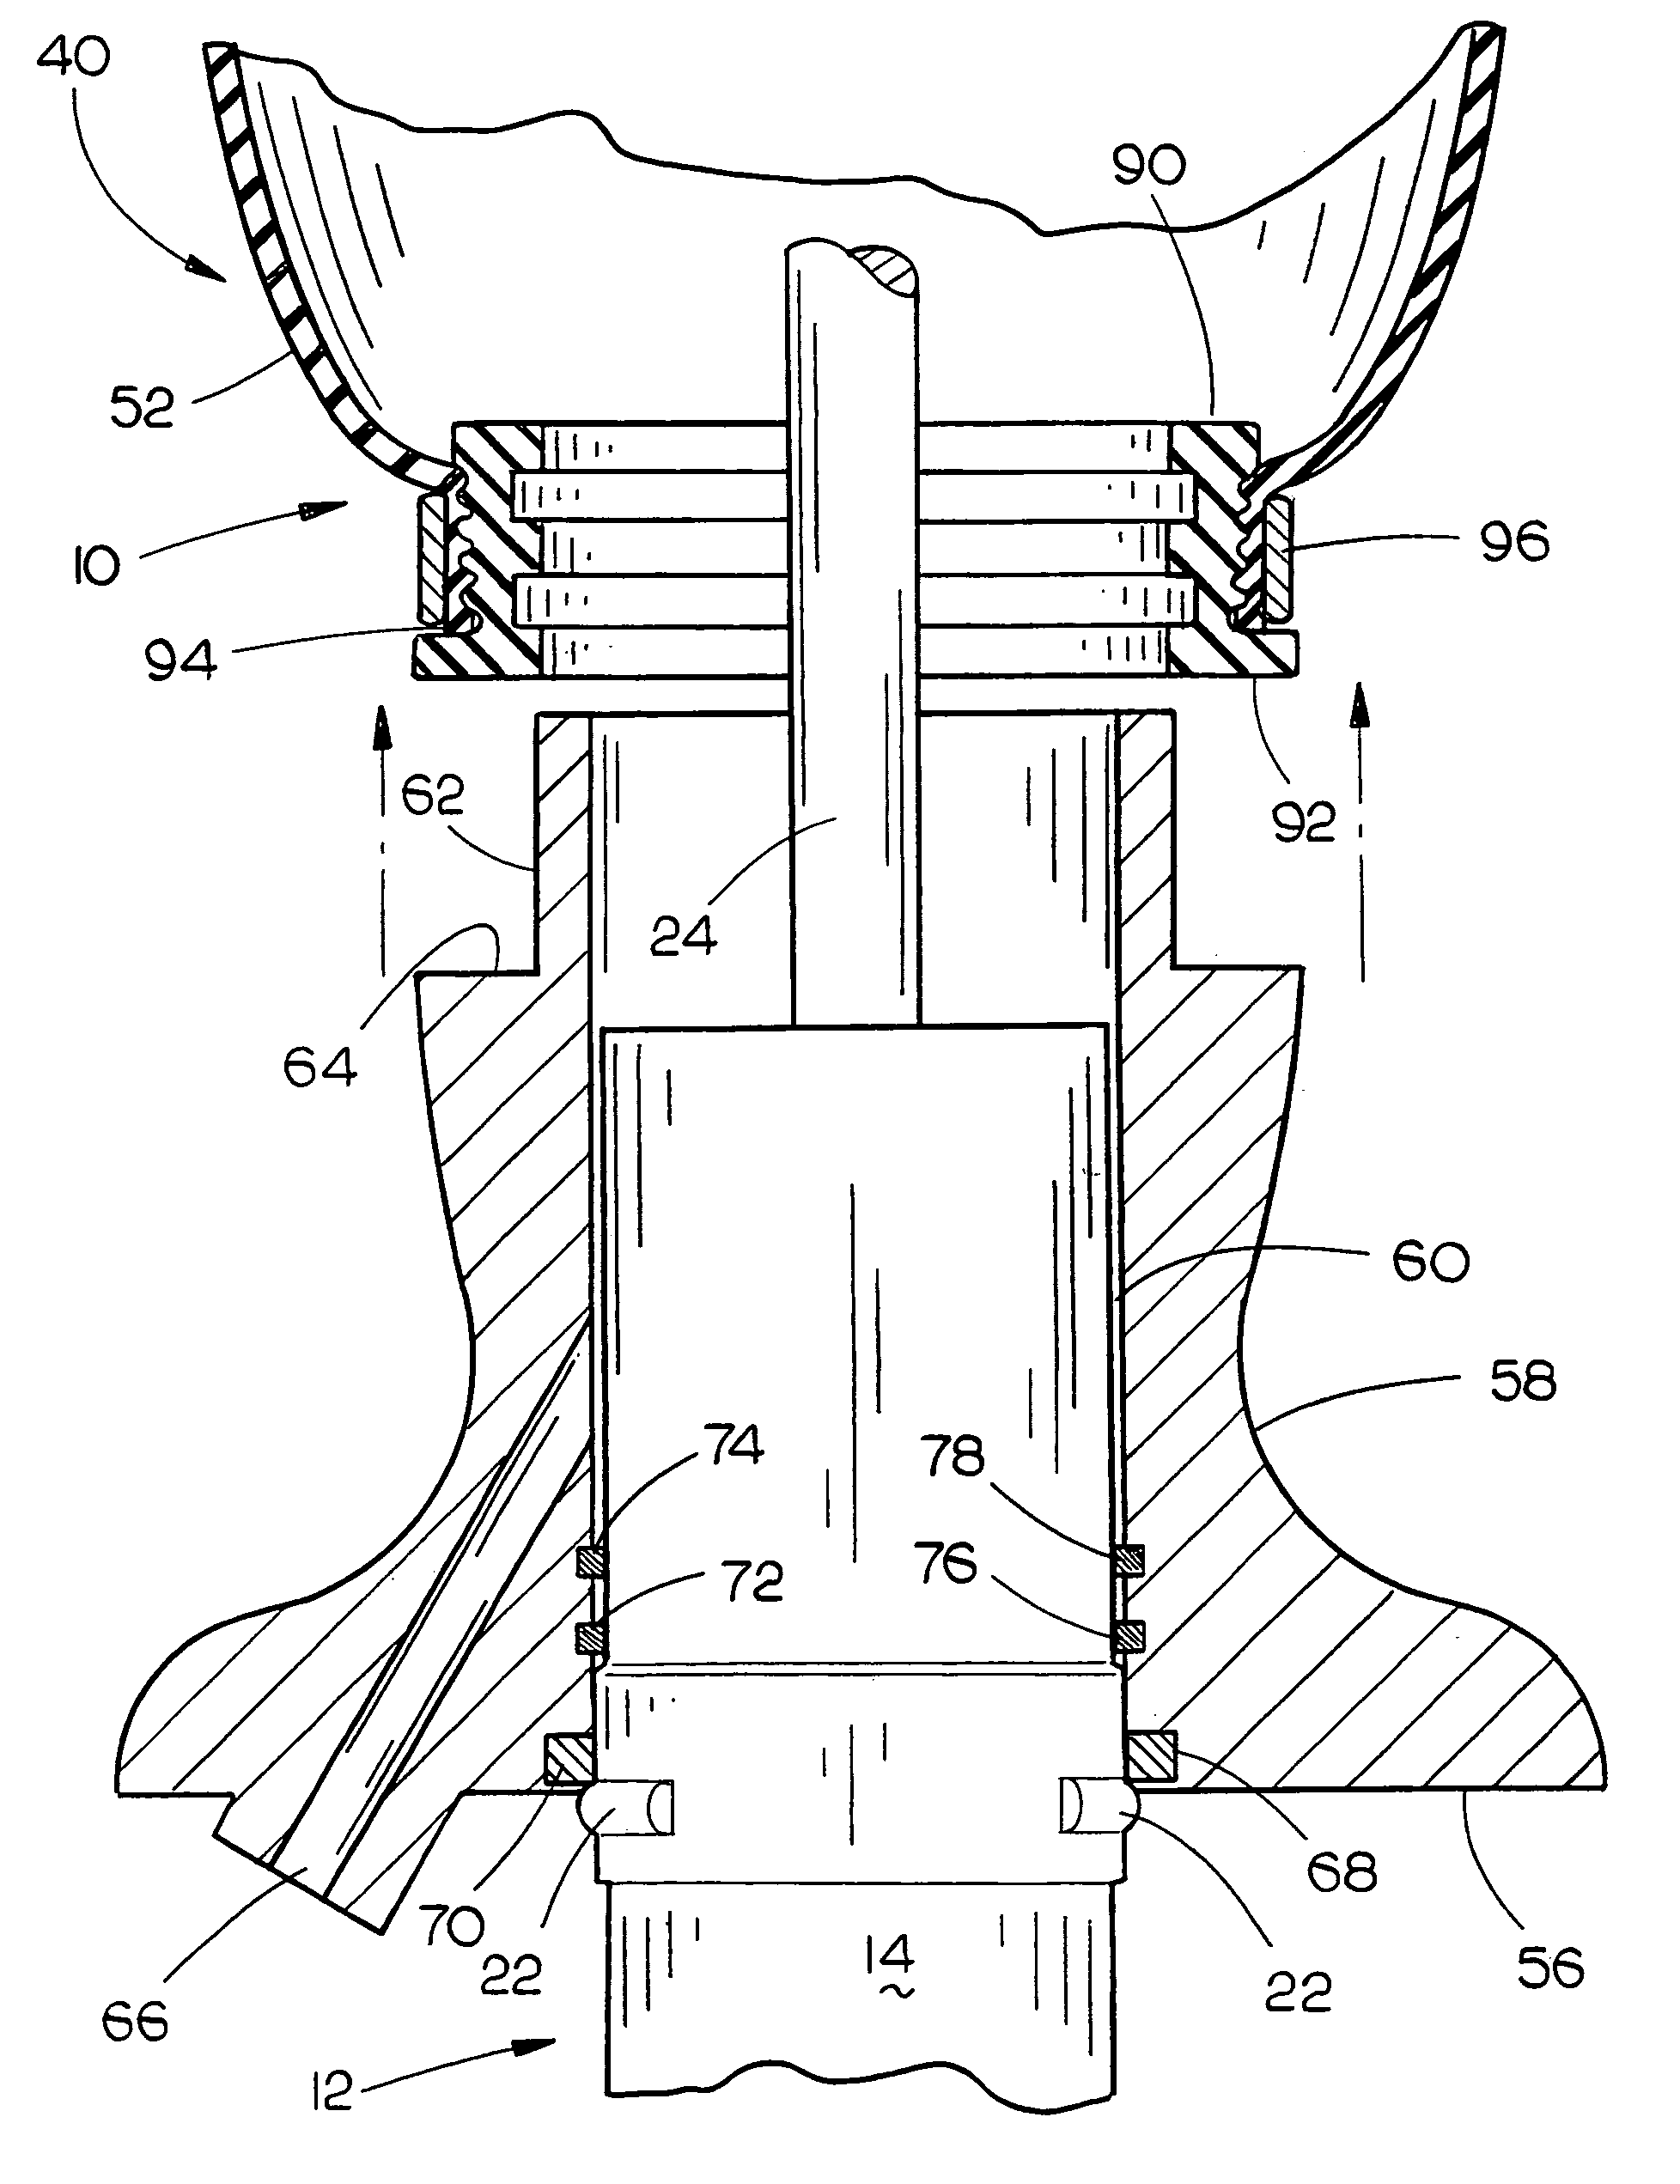 Air spring and shock absorber assembly for use in suspension systems